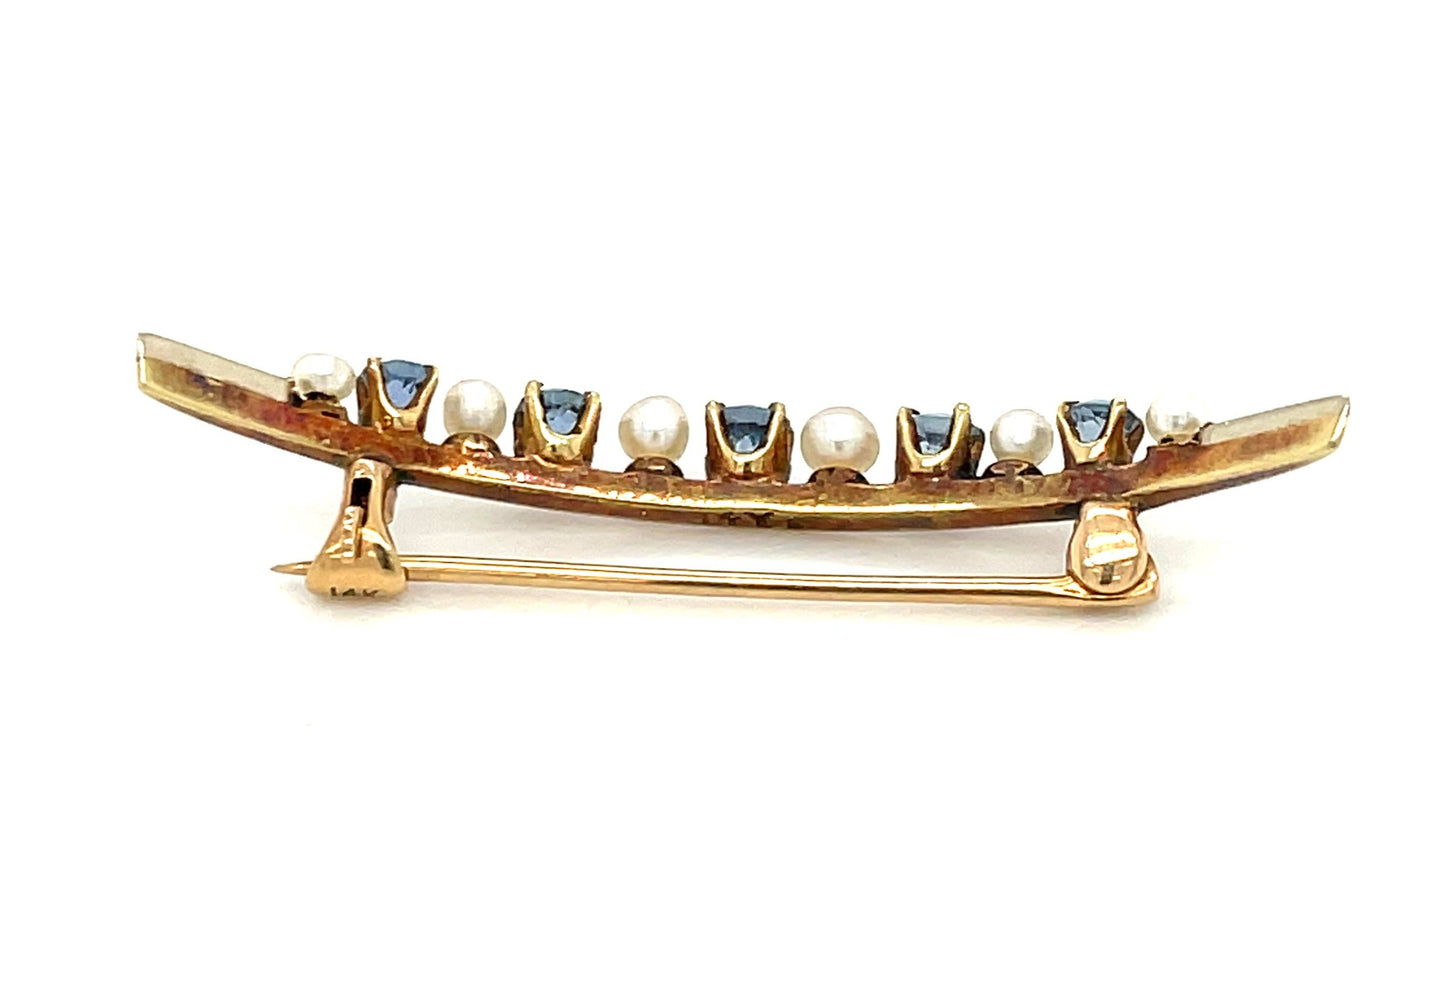 14k Yellow Gold Sapphire and Pearl Cresent Pin 1.8g